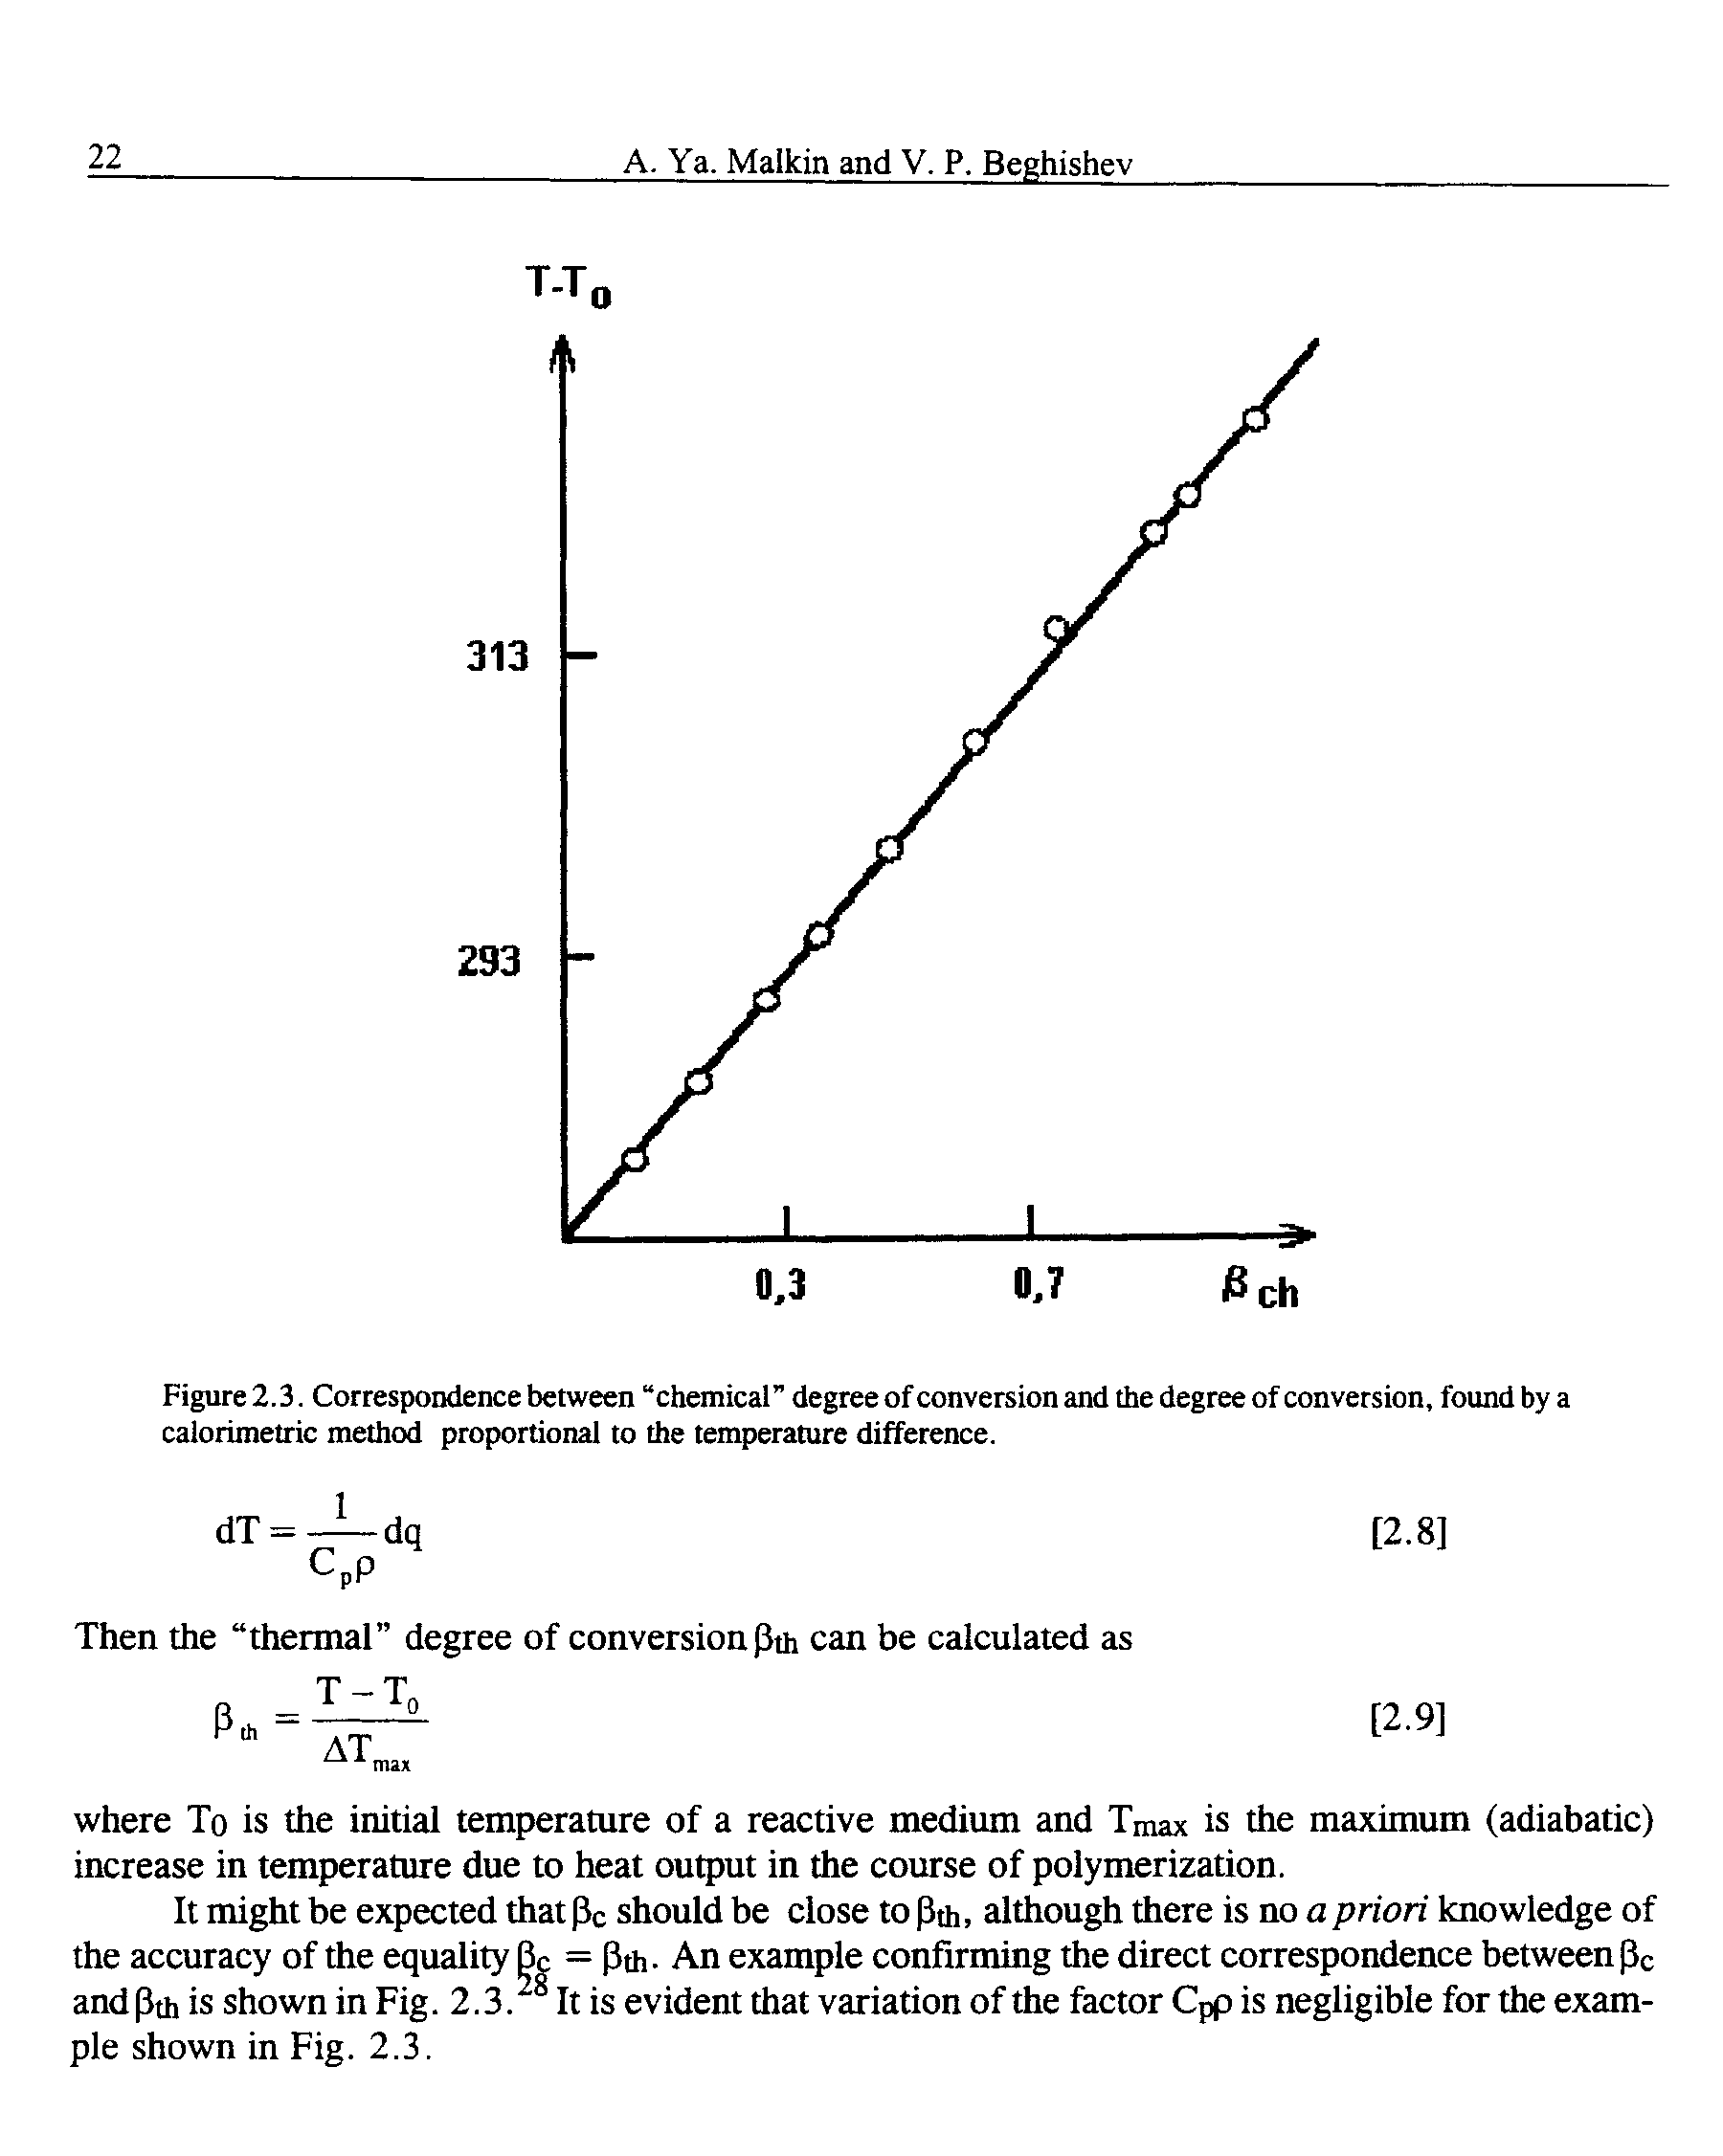 Figure 2.3. Correspondence between chemical degree of conversion and the degree of conversion, found by a calorimetric method proportional to the temperature difference.